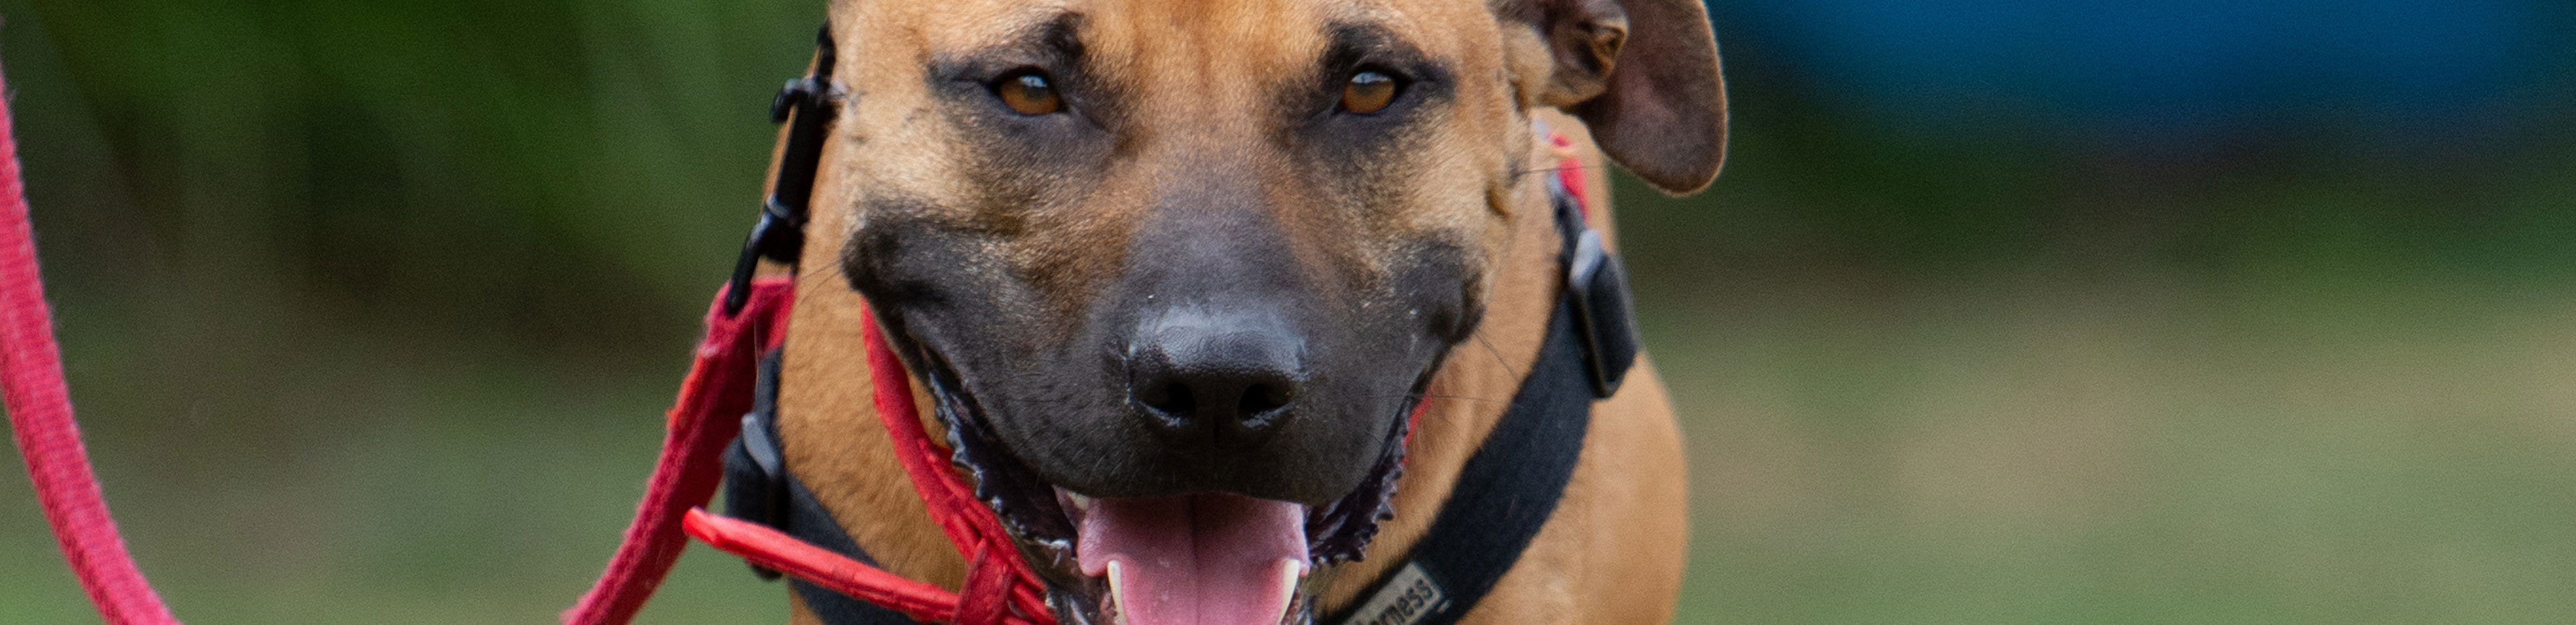 Gregorys happy tail who came to RSPCA after warrants executed in relation to dog fighting